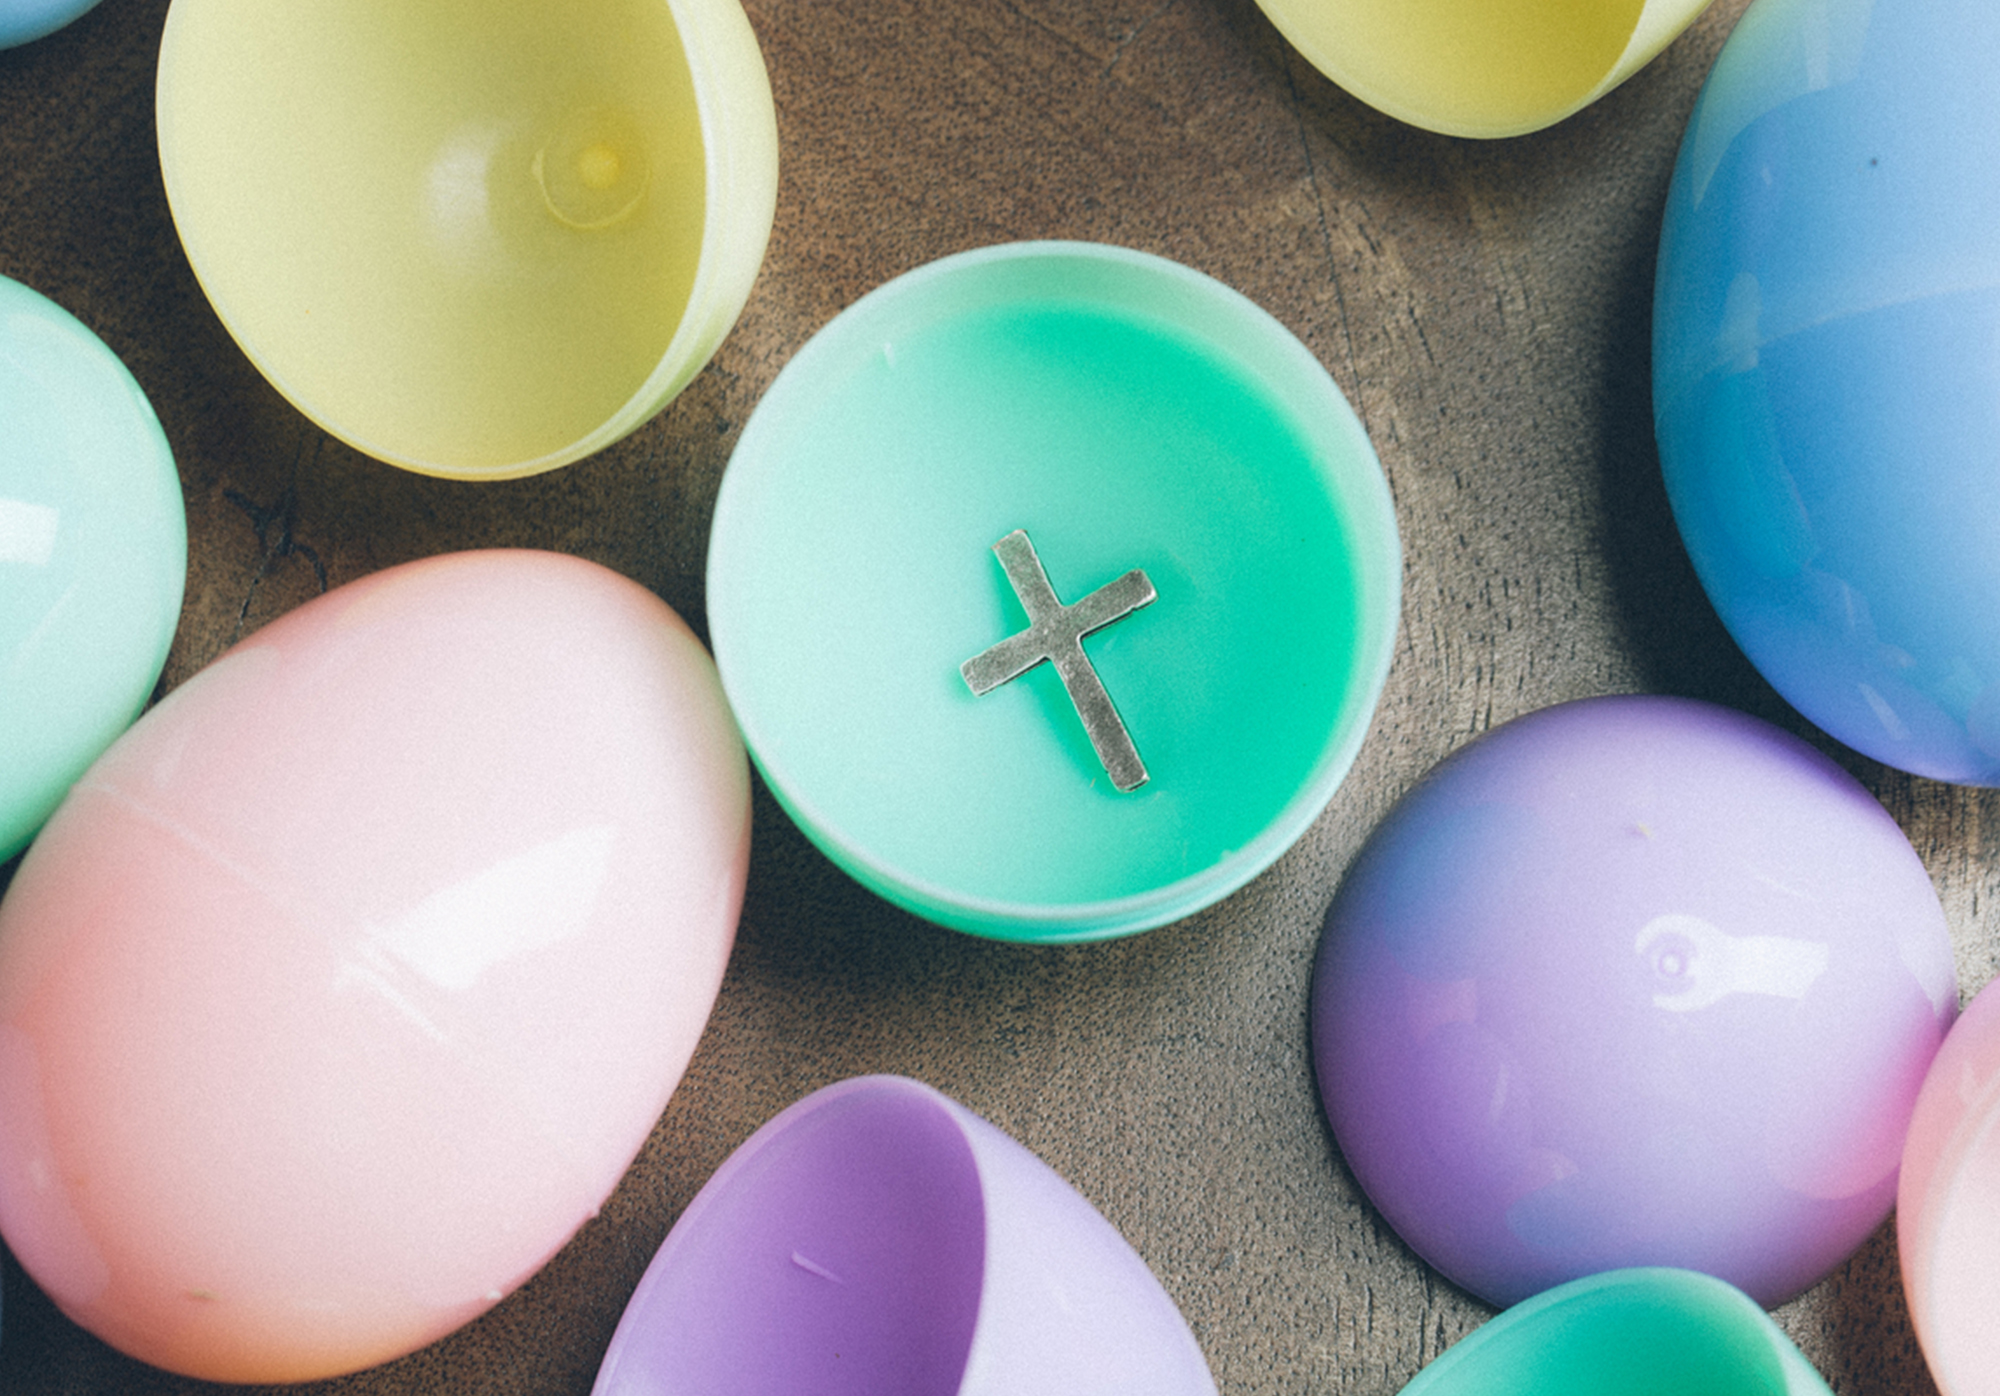 Patti Garibay on 10 Creative Ways to Make This Easter the Most Meaningful and Memorable Ever